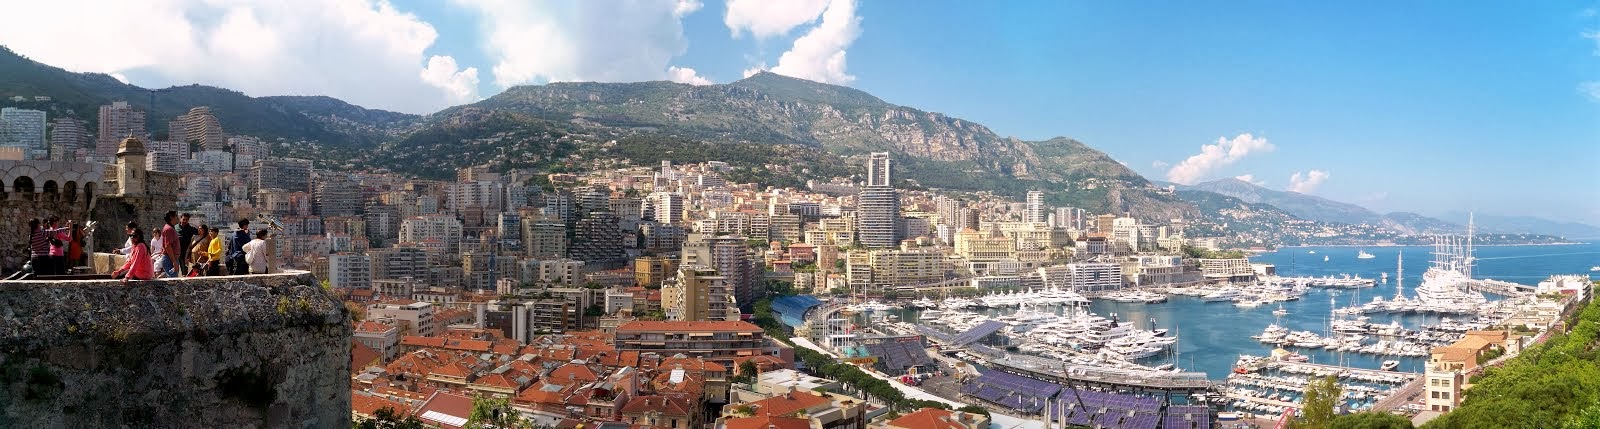 French Riviera Holiday Trip from London